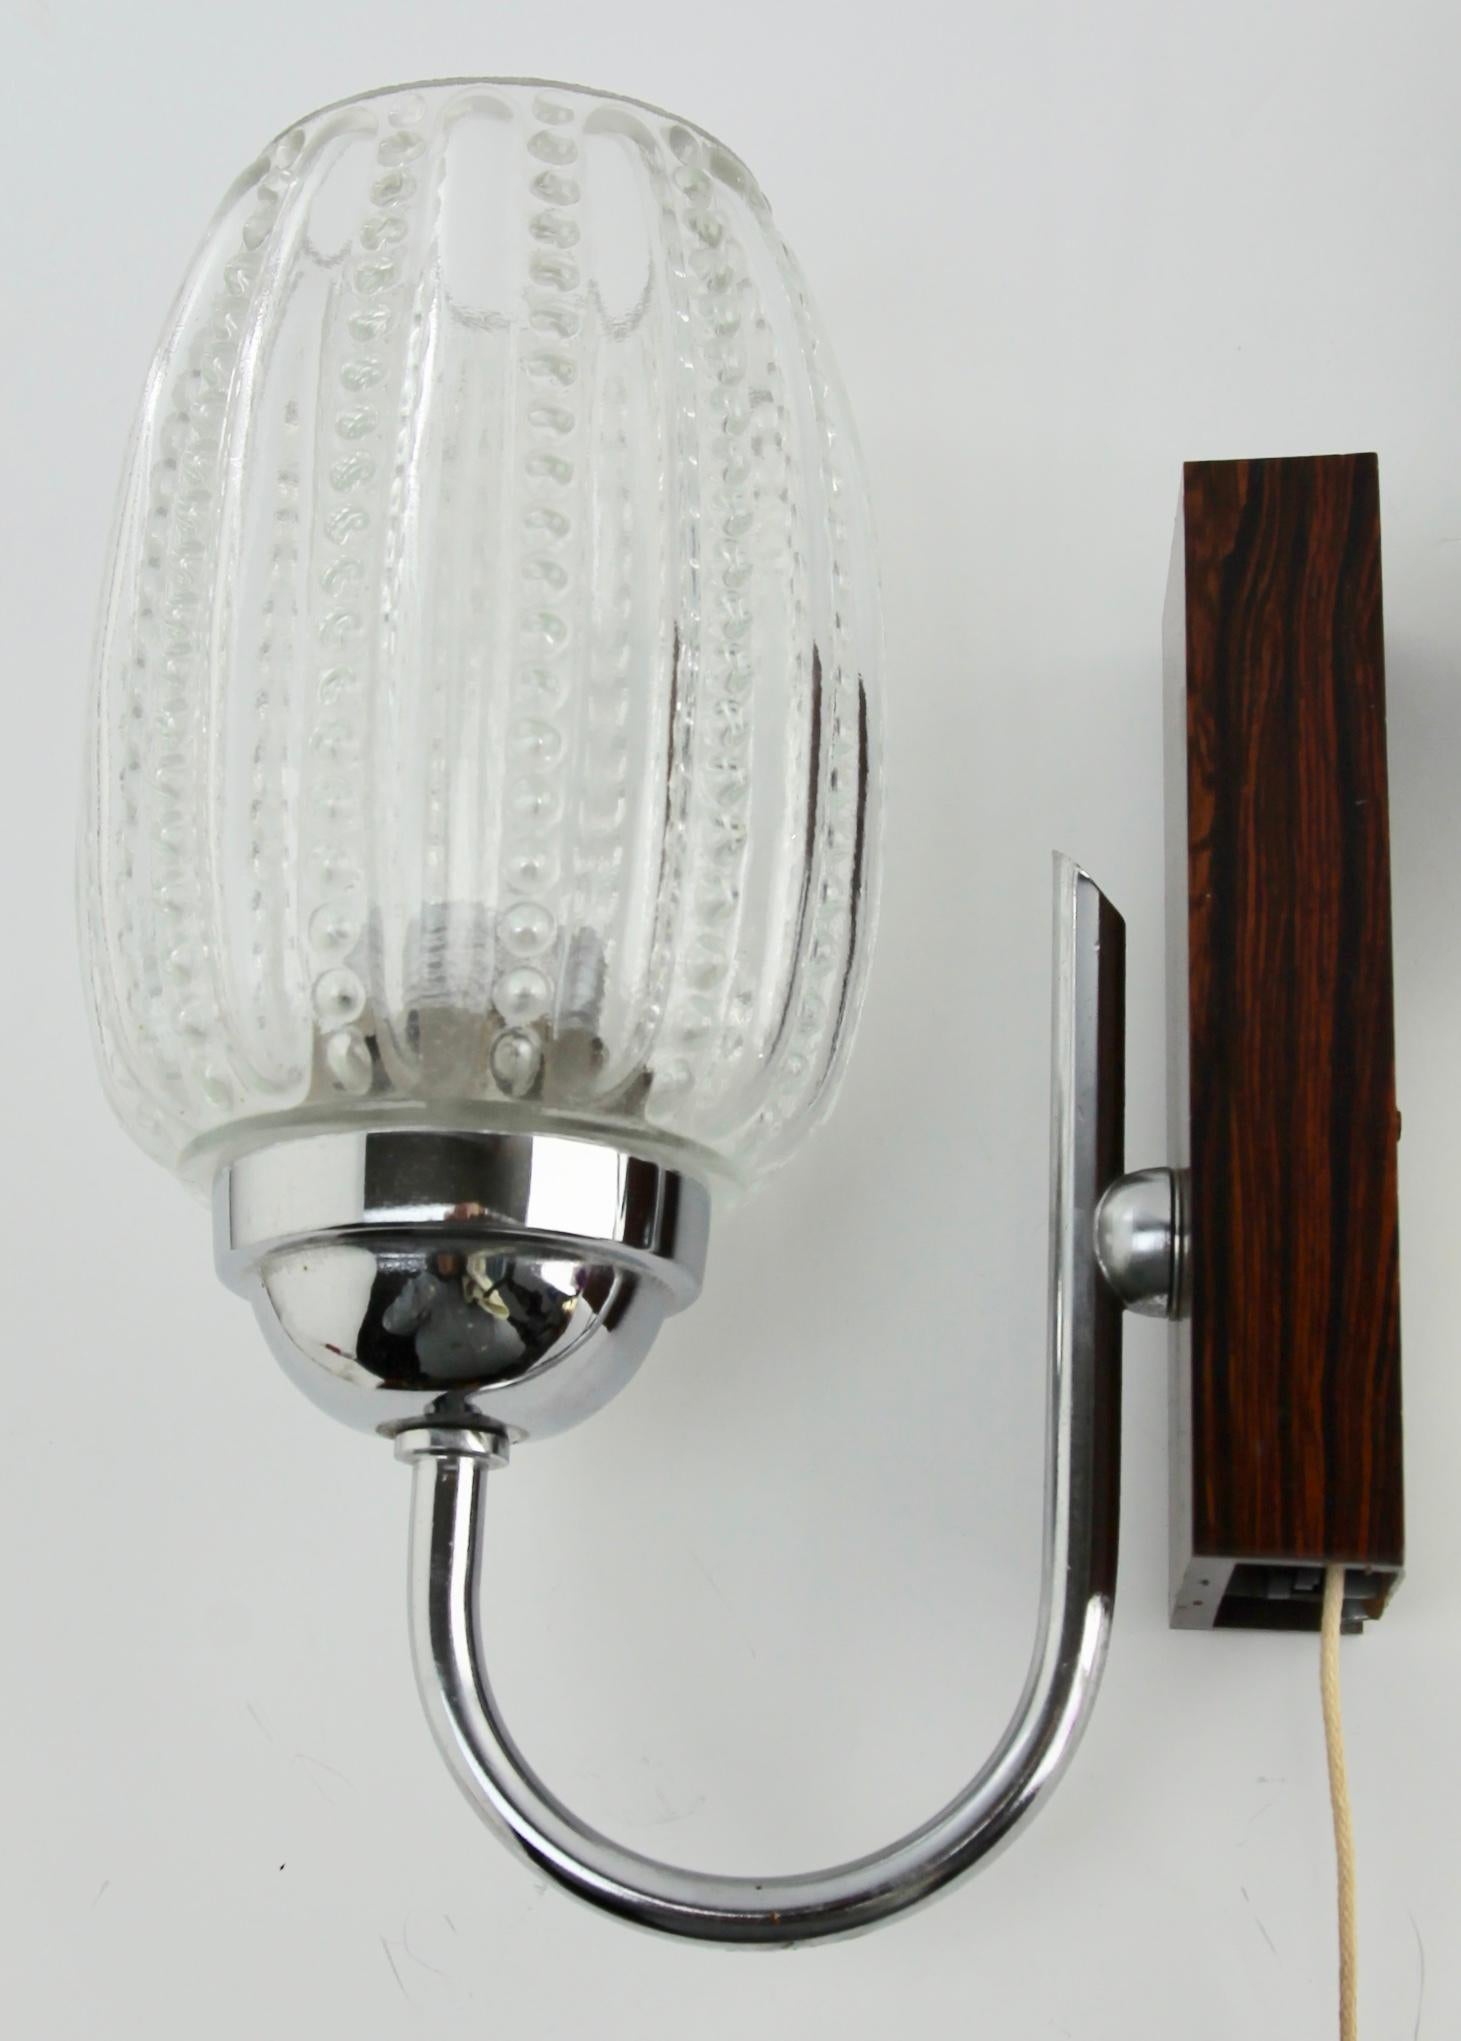 Vintage 1 arm pair of wall mount lamp, the 1960s.
Hillebrand Germany.
Factory in light fixtures was founded by Egon Hillebrand in 1881, who was originally a foliage grower and installer. 
The factory was located in Neheim, Germany